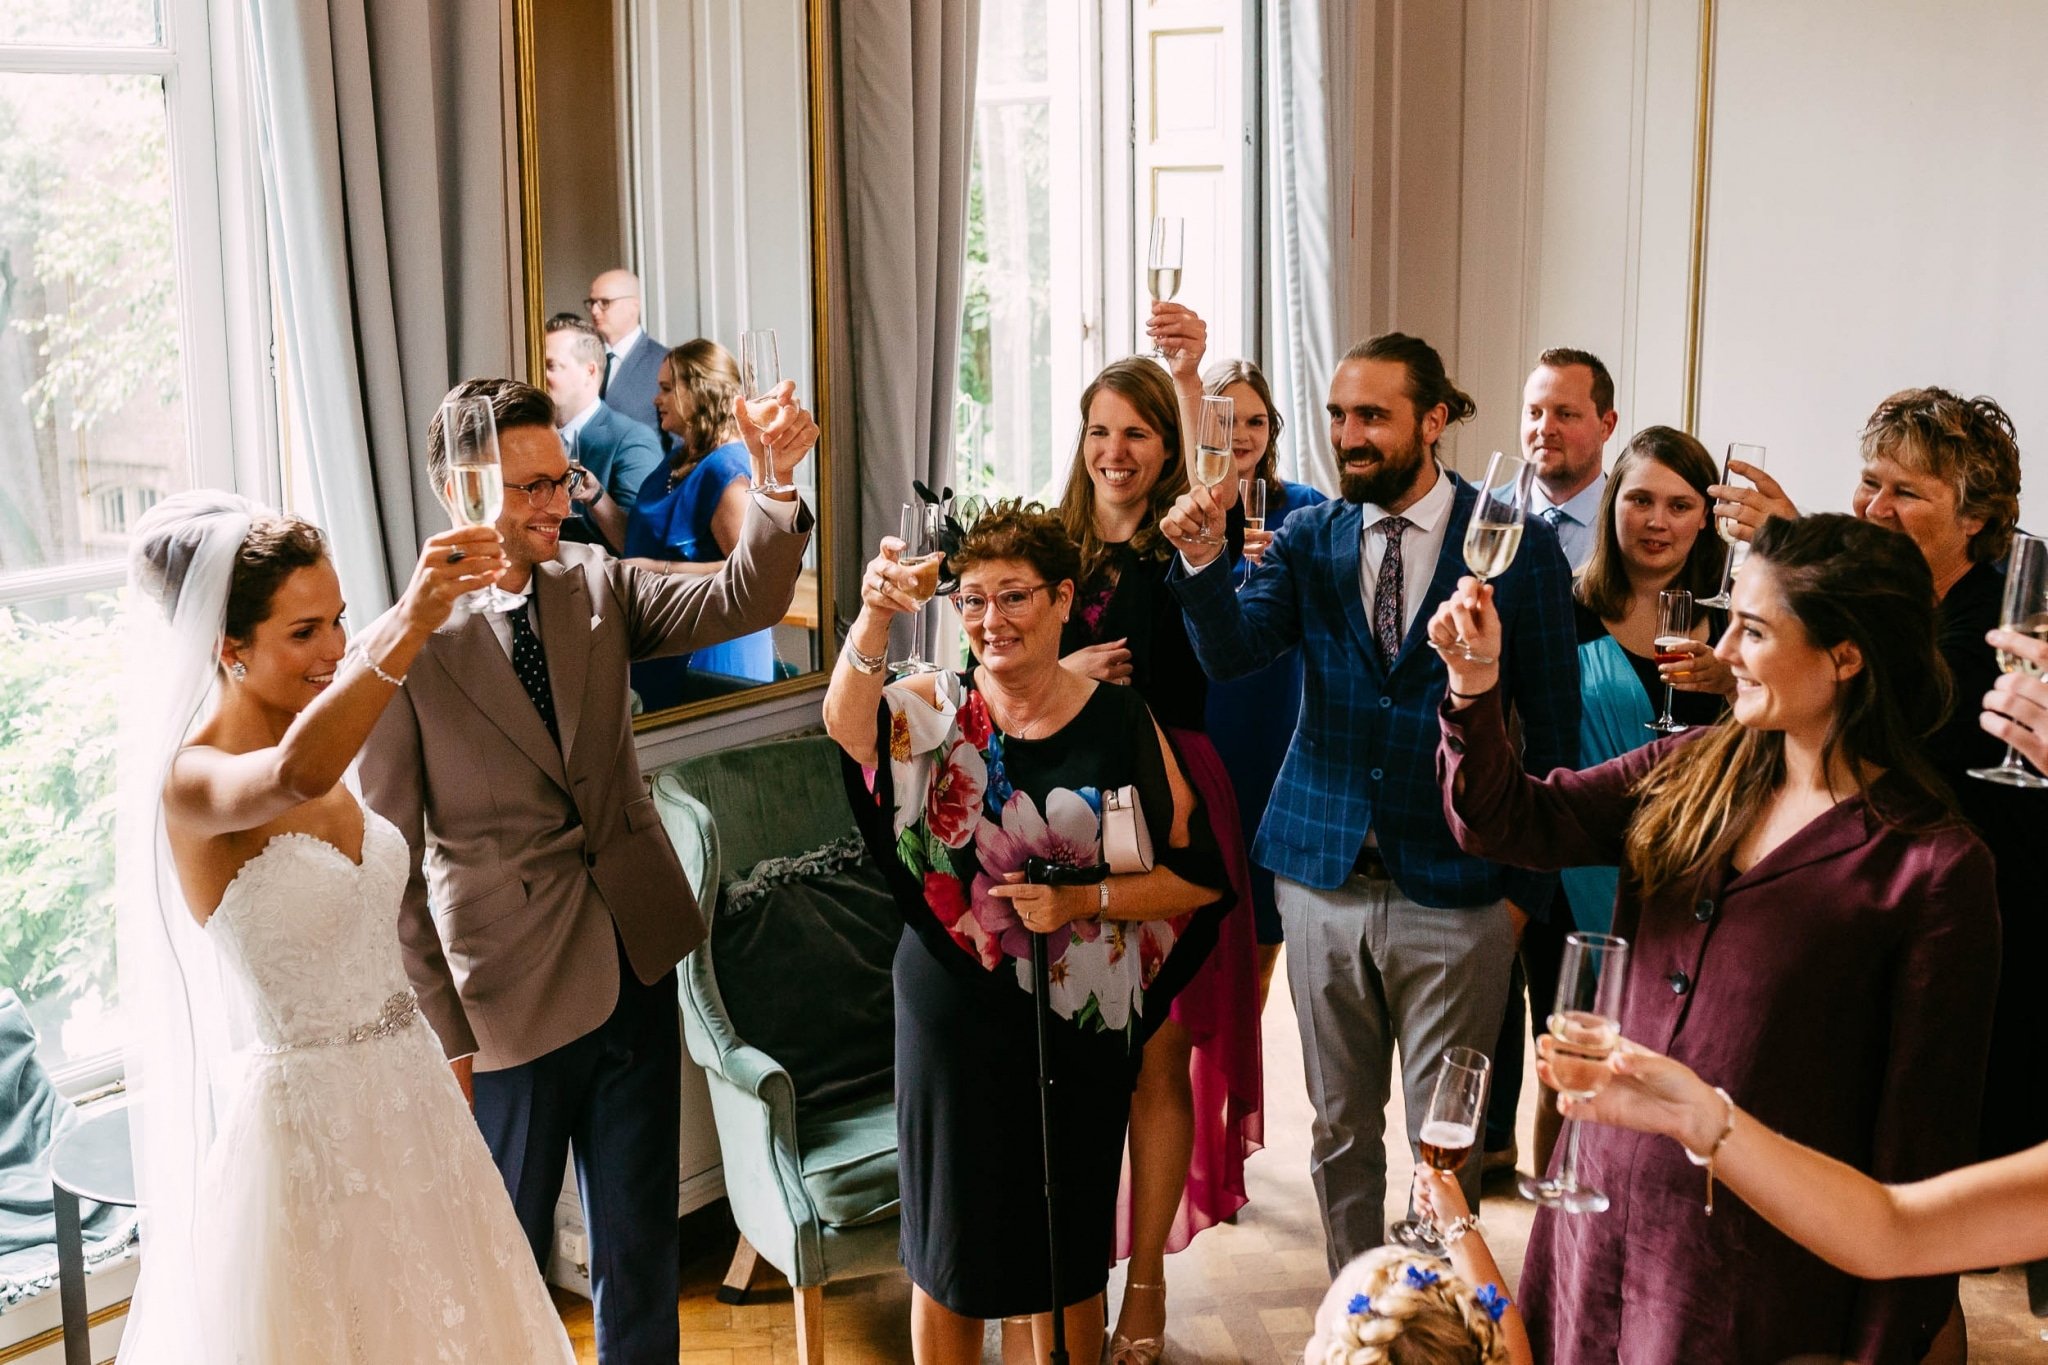 A group of people toast at a wedding reception.